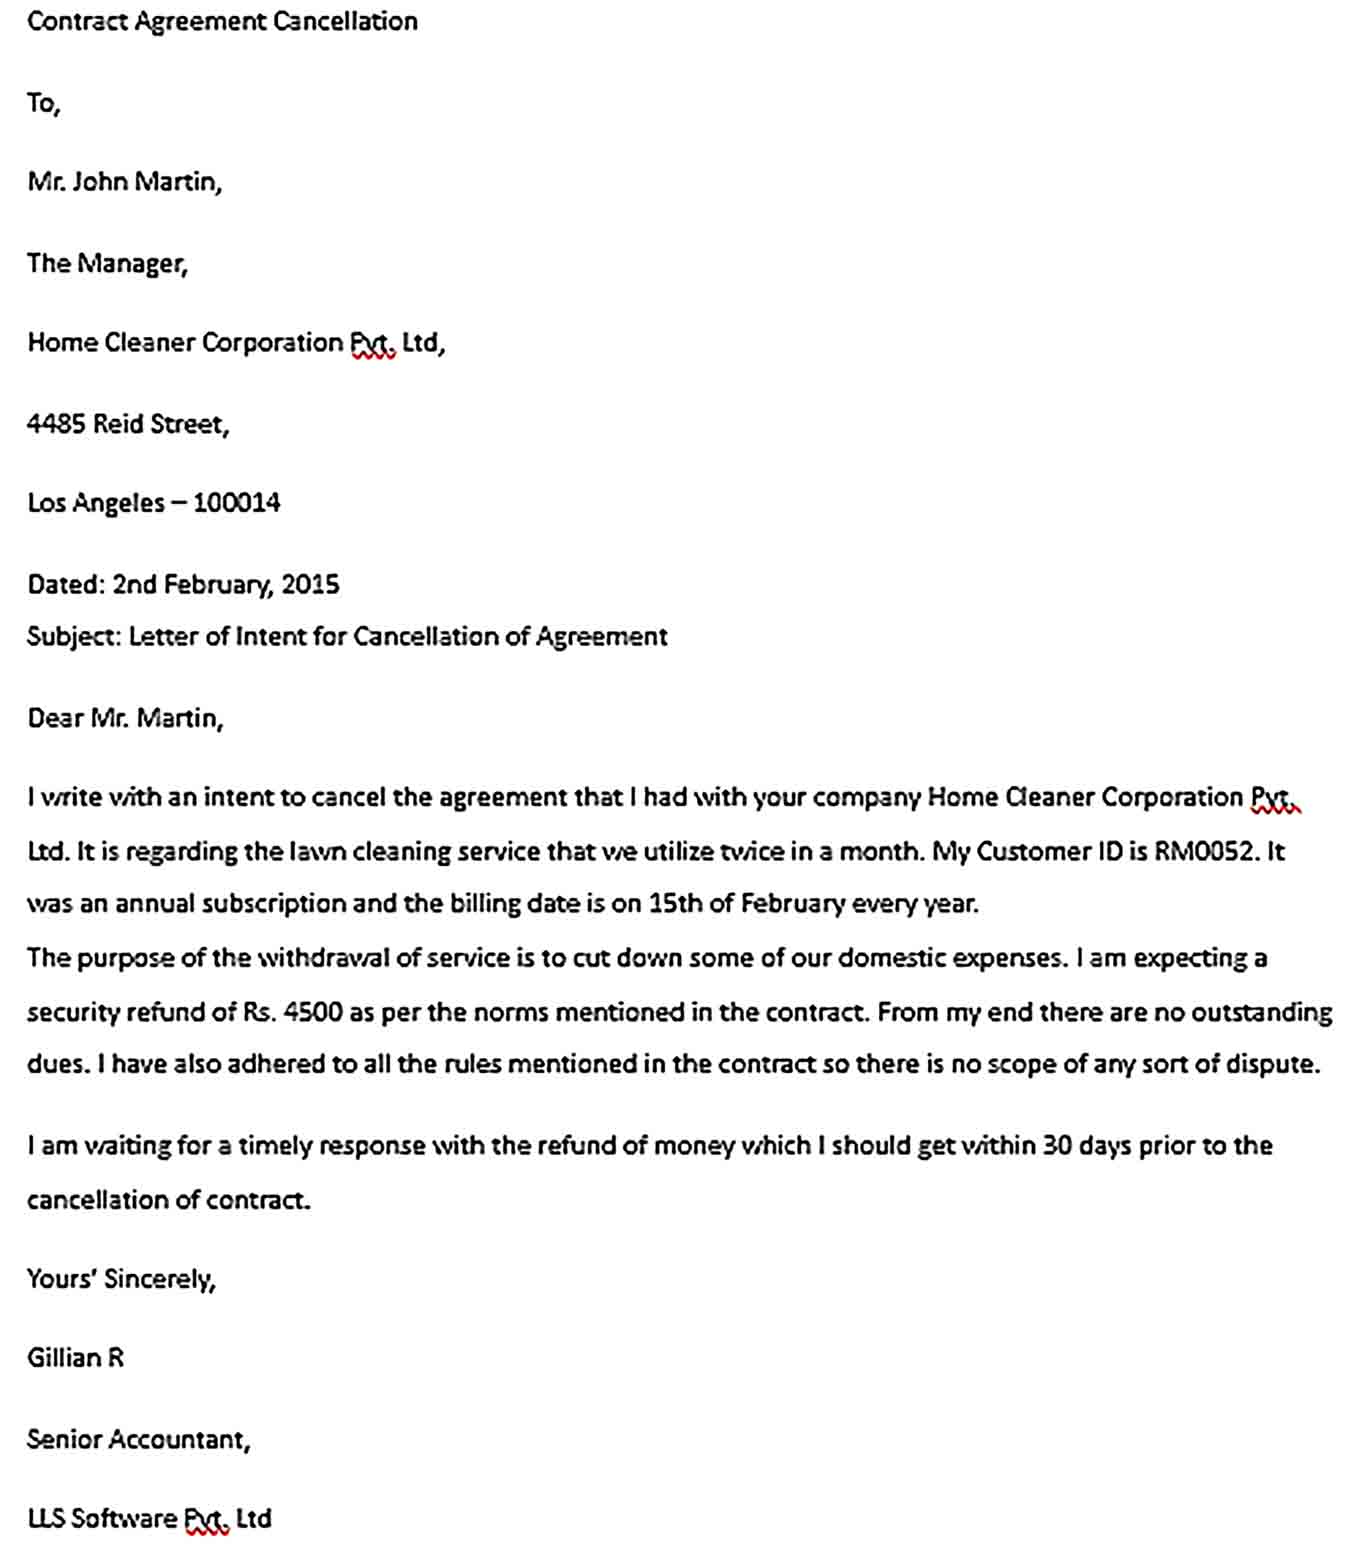 Sample Contract Agreement Cancellation